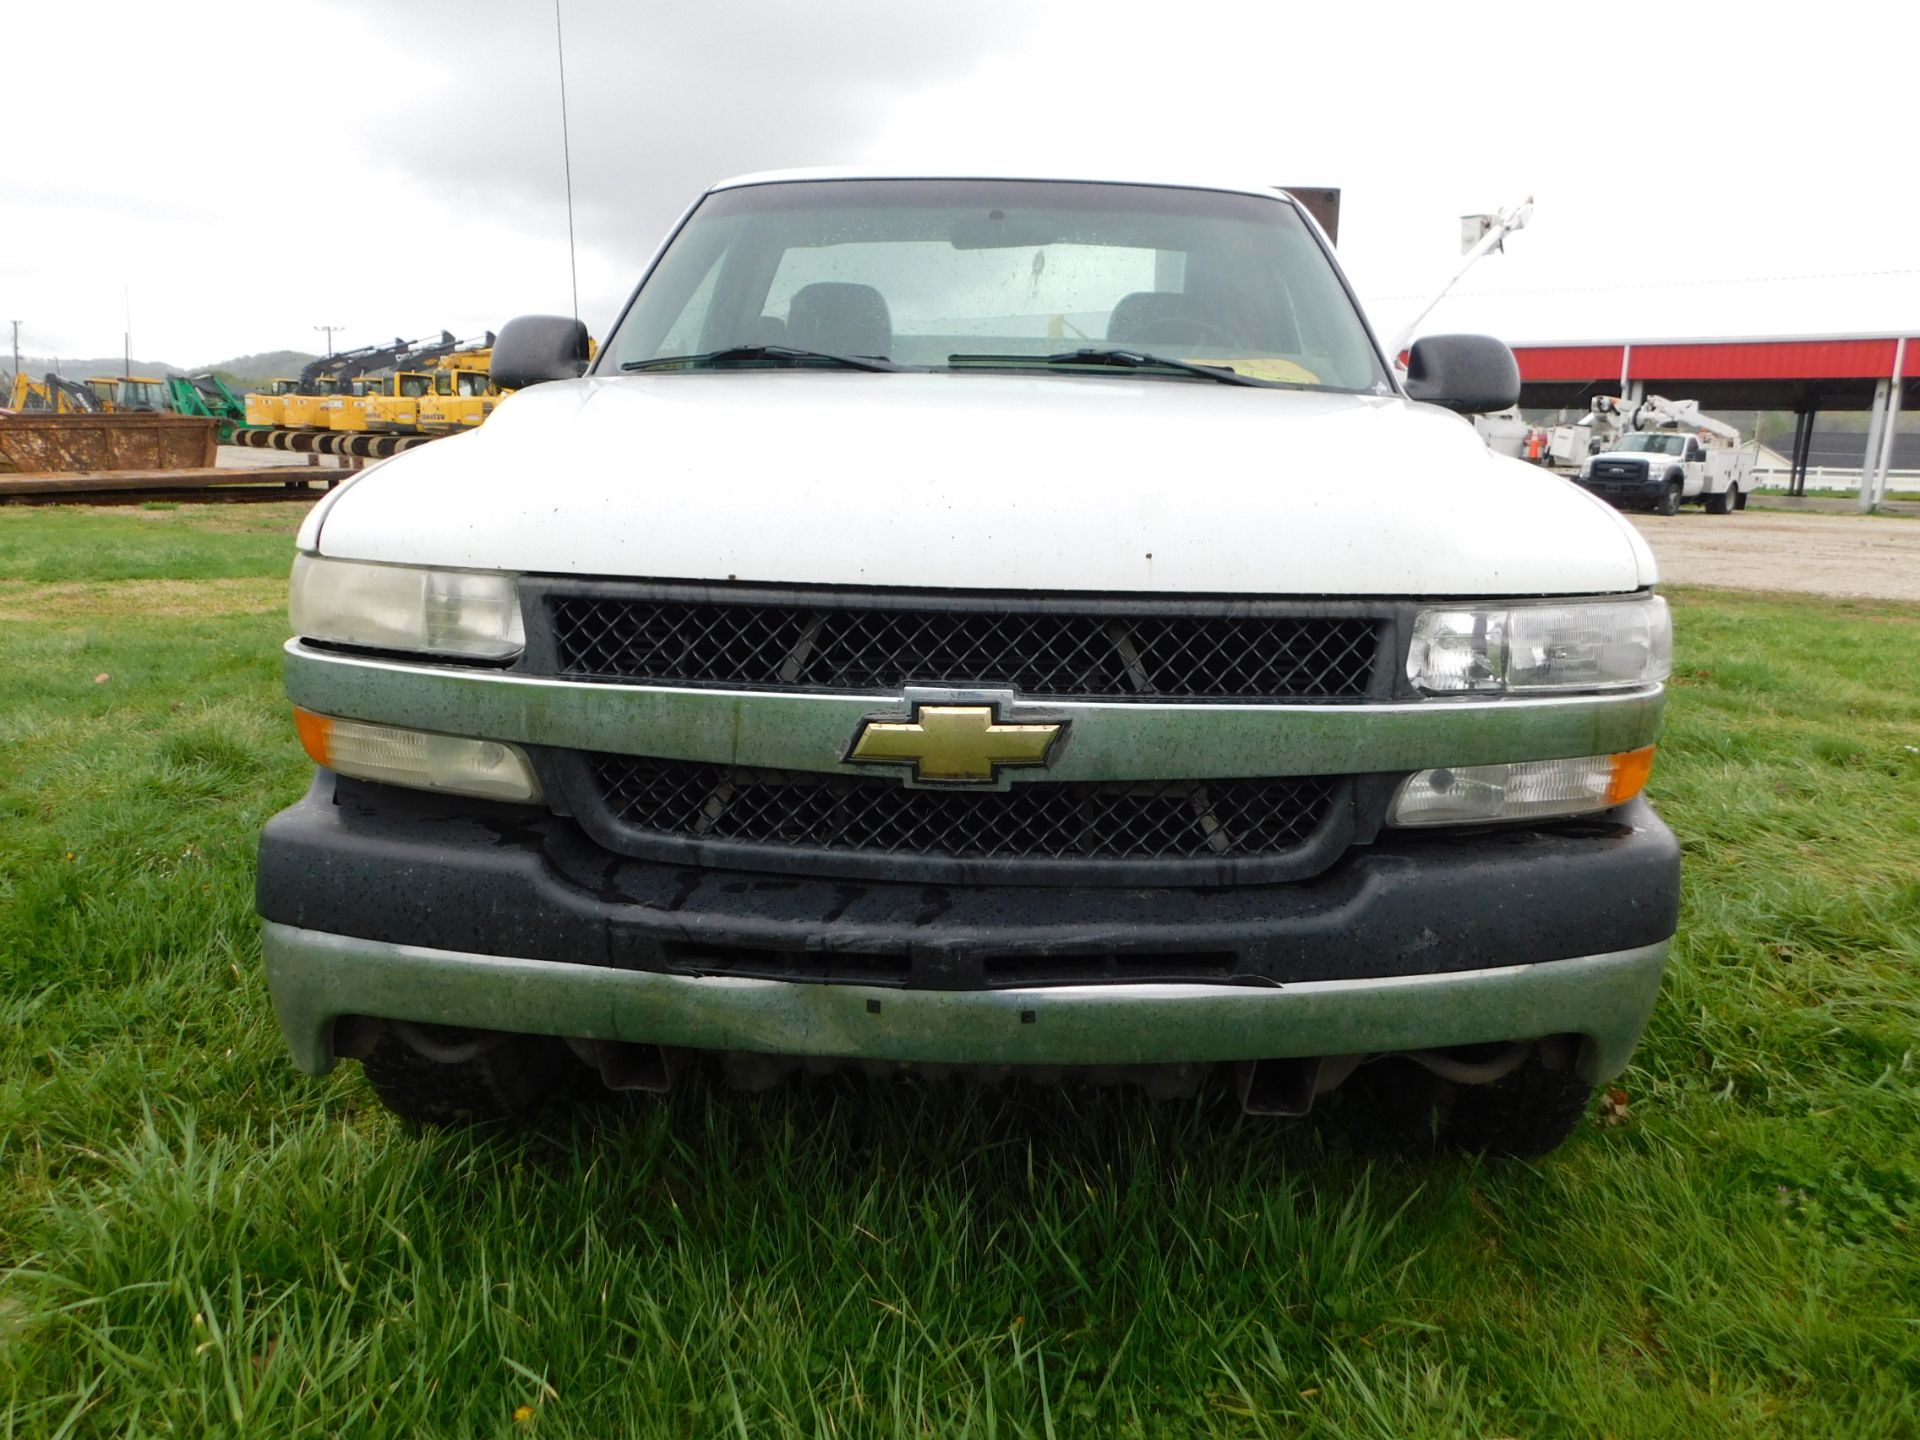 2002 Chevrolet 2500HD Service Truck, VIN 1GBHC24122E130607, Diesel, Automatic, AM/FM, AC, Regular - Image 2 of 23